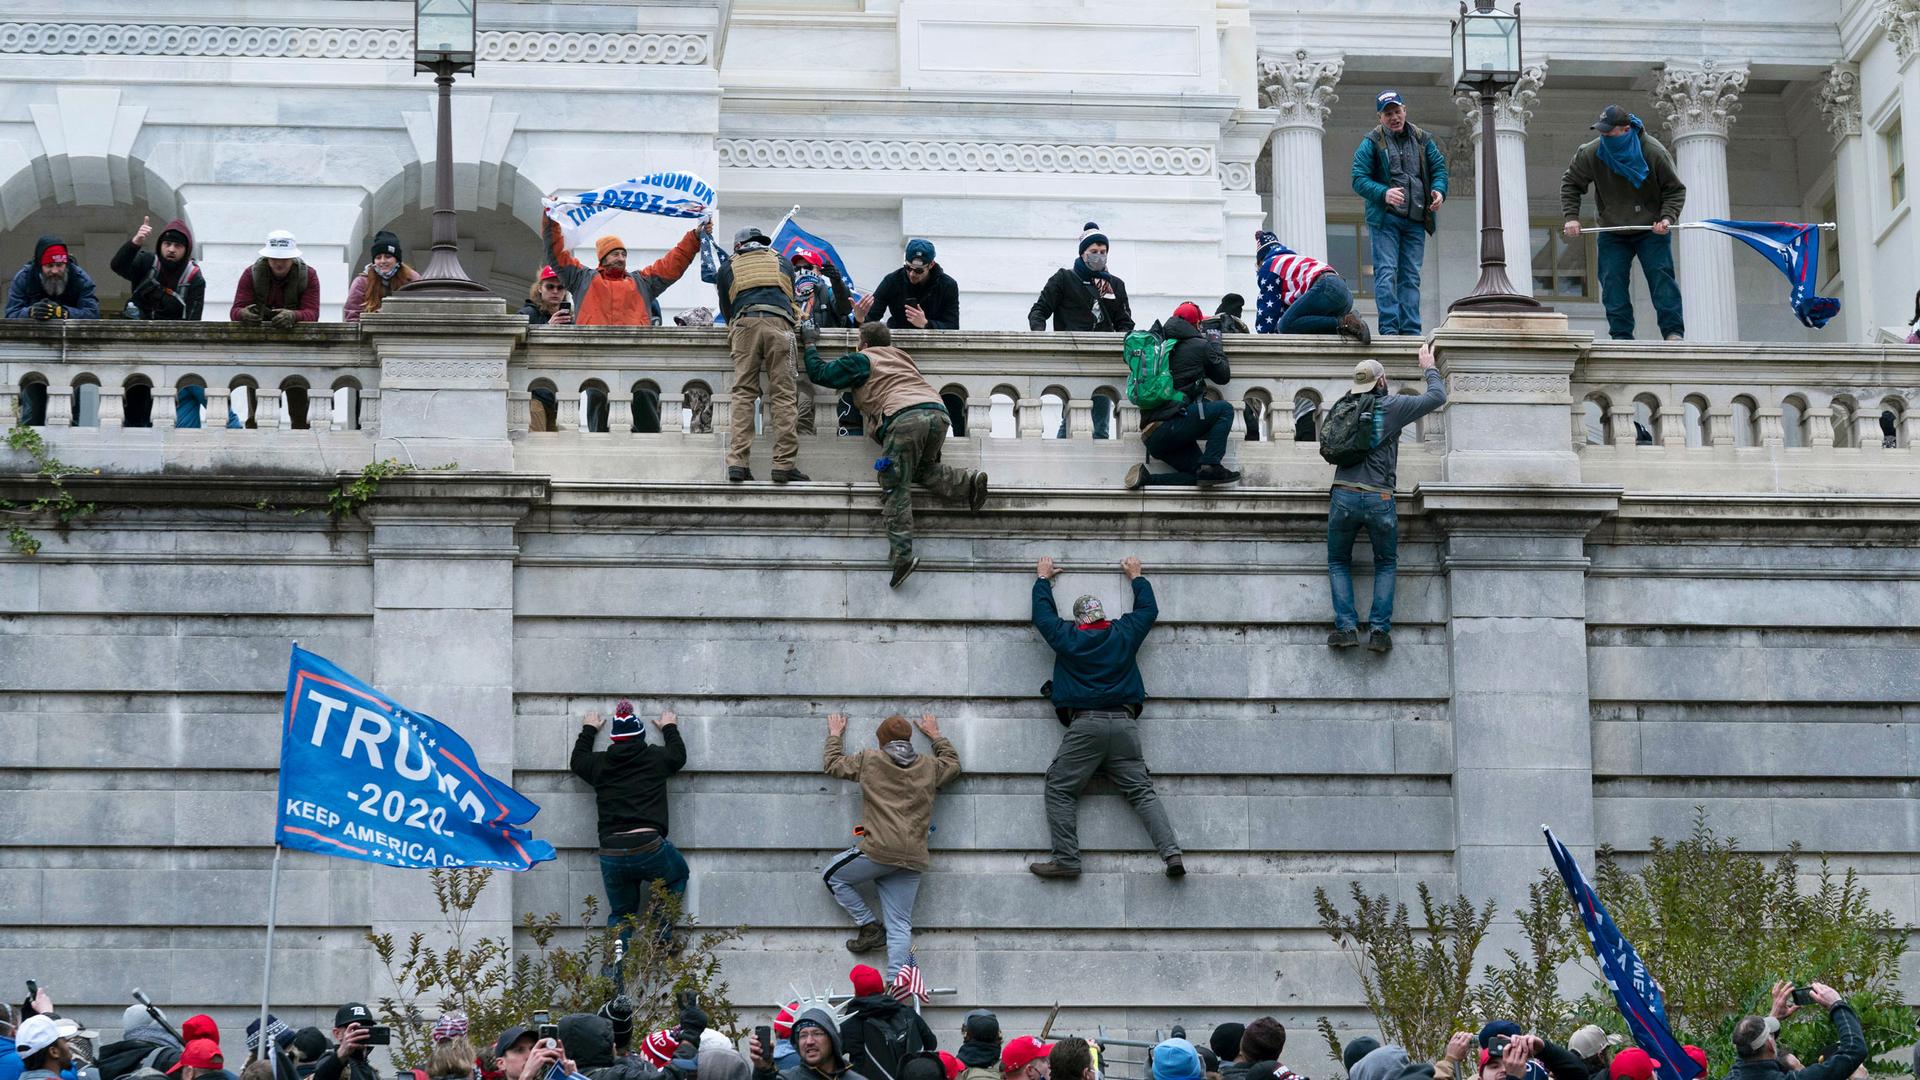 A large group of rioting supporters of former President Donald Trump are show carrying Trump 2020 flags and climbing the stone wall of the US Capitol.